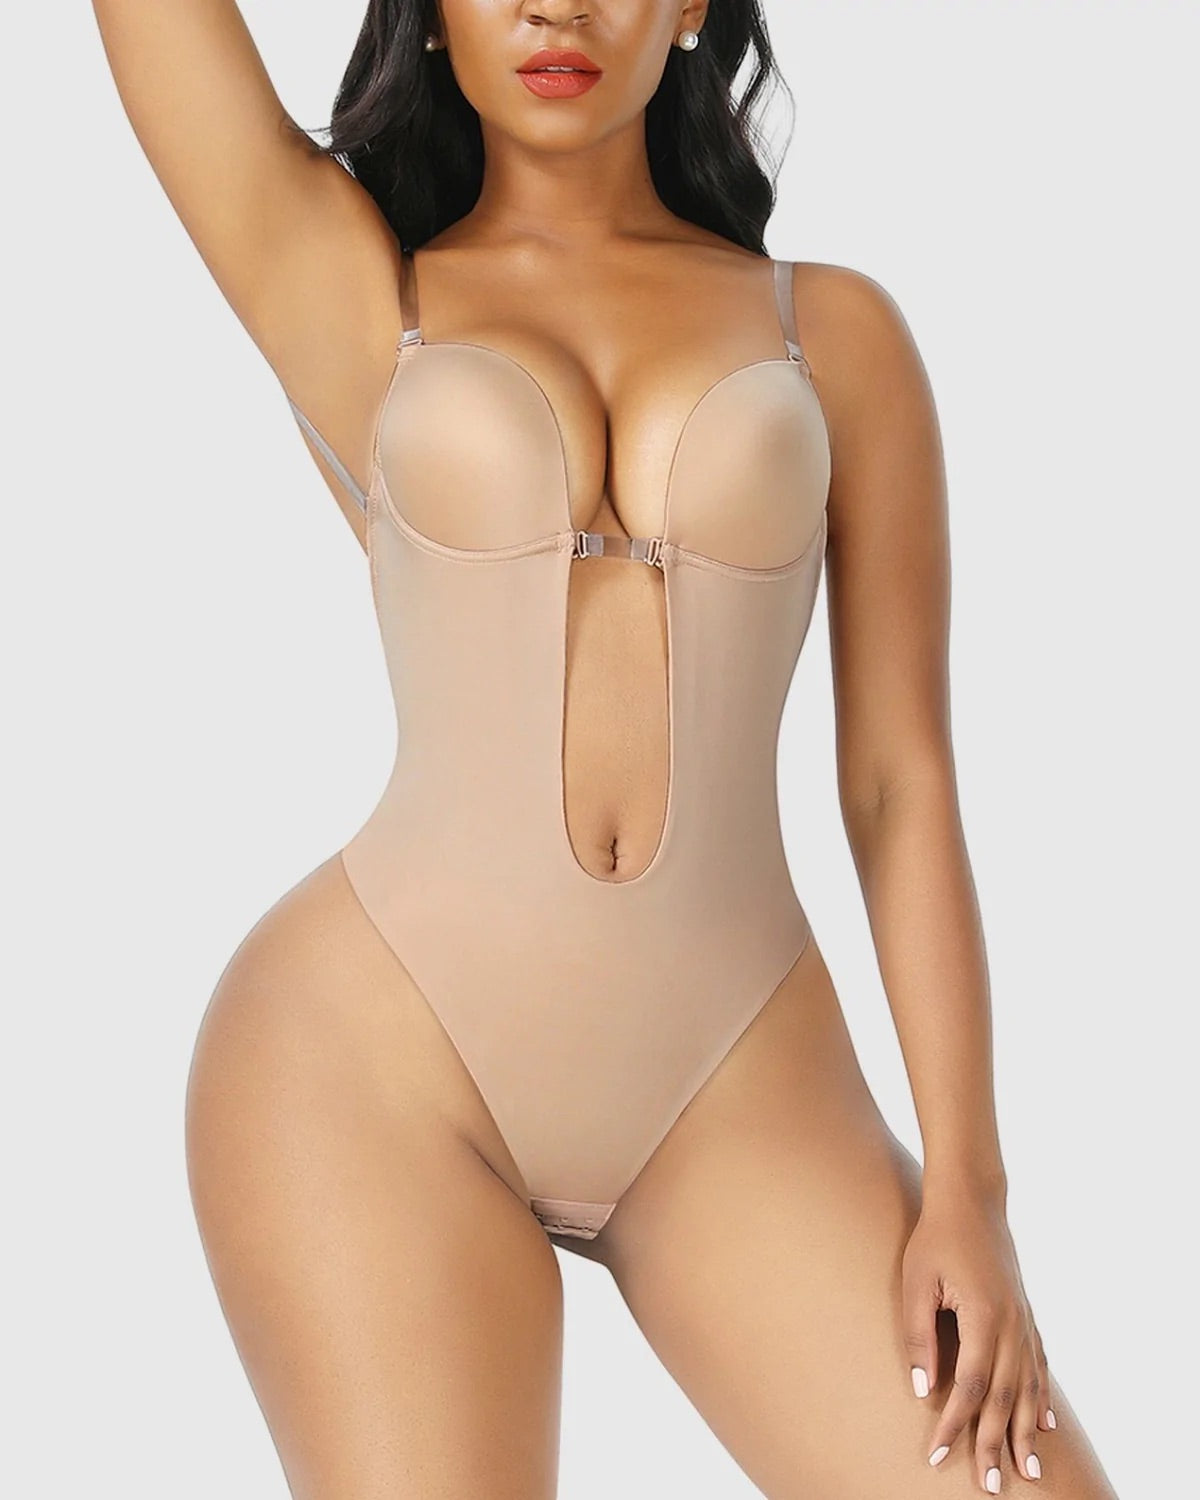 Sexy U Bras Invisible Backless Women Strapless Lingerie Sex Plunge